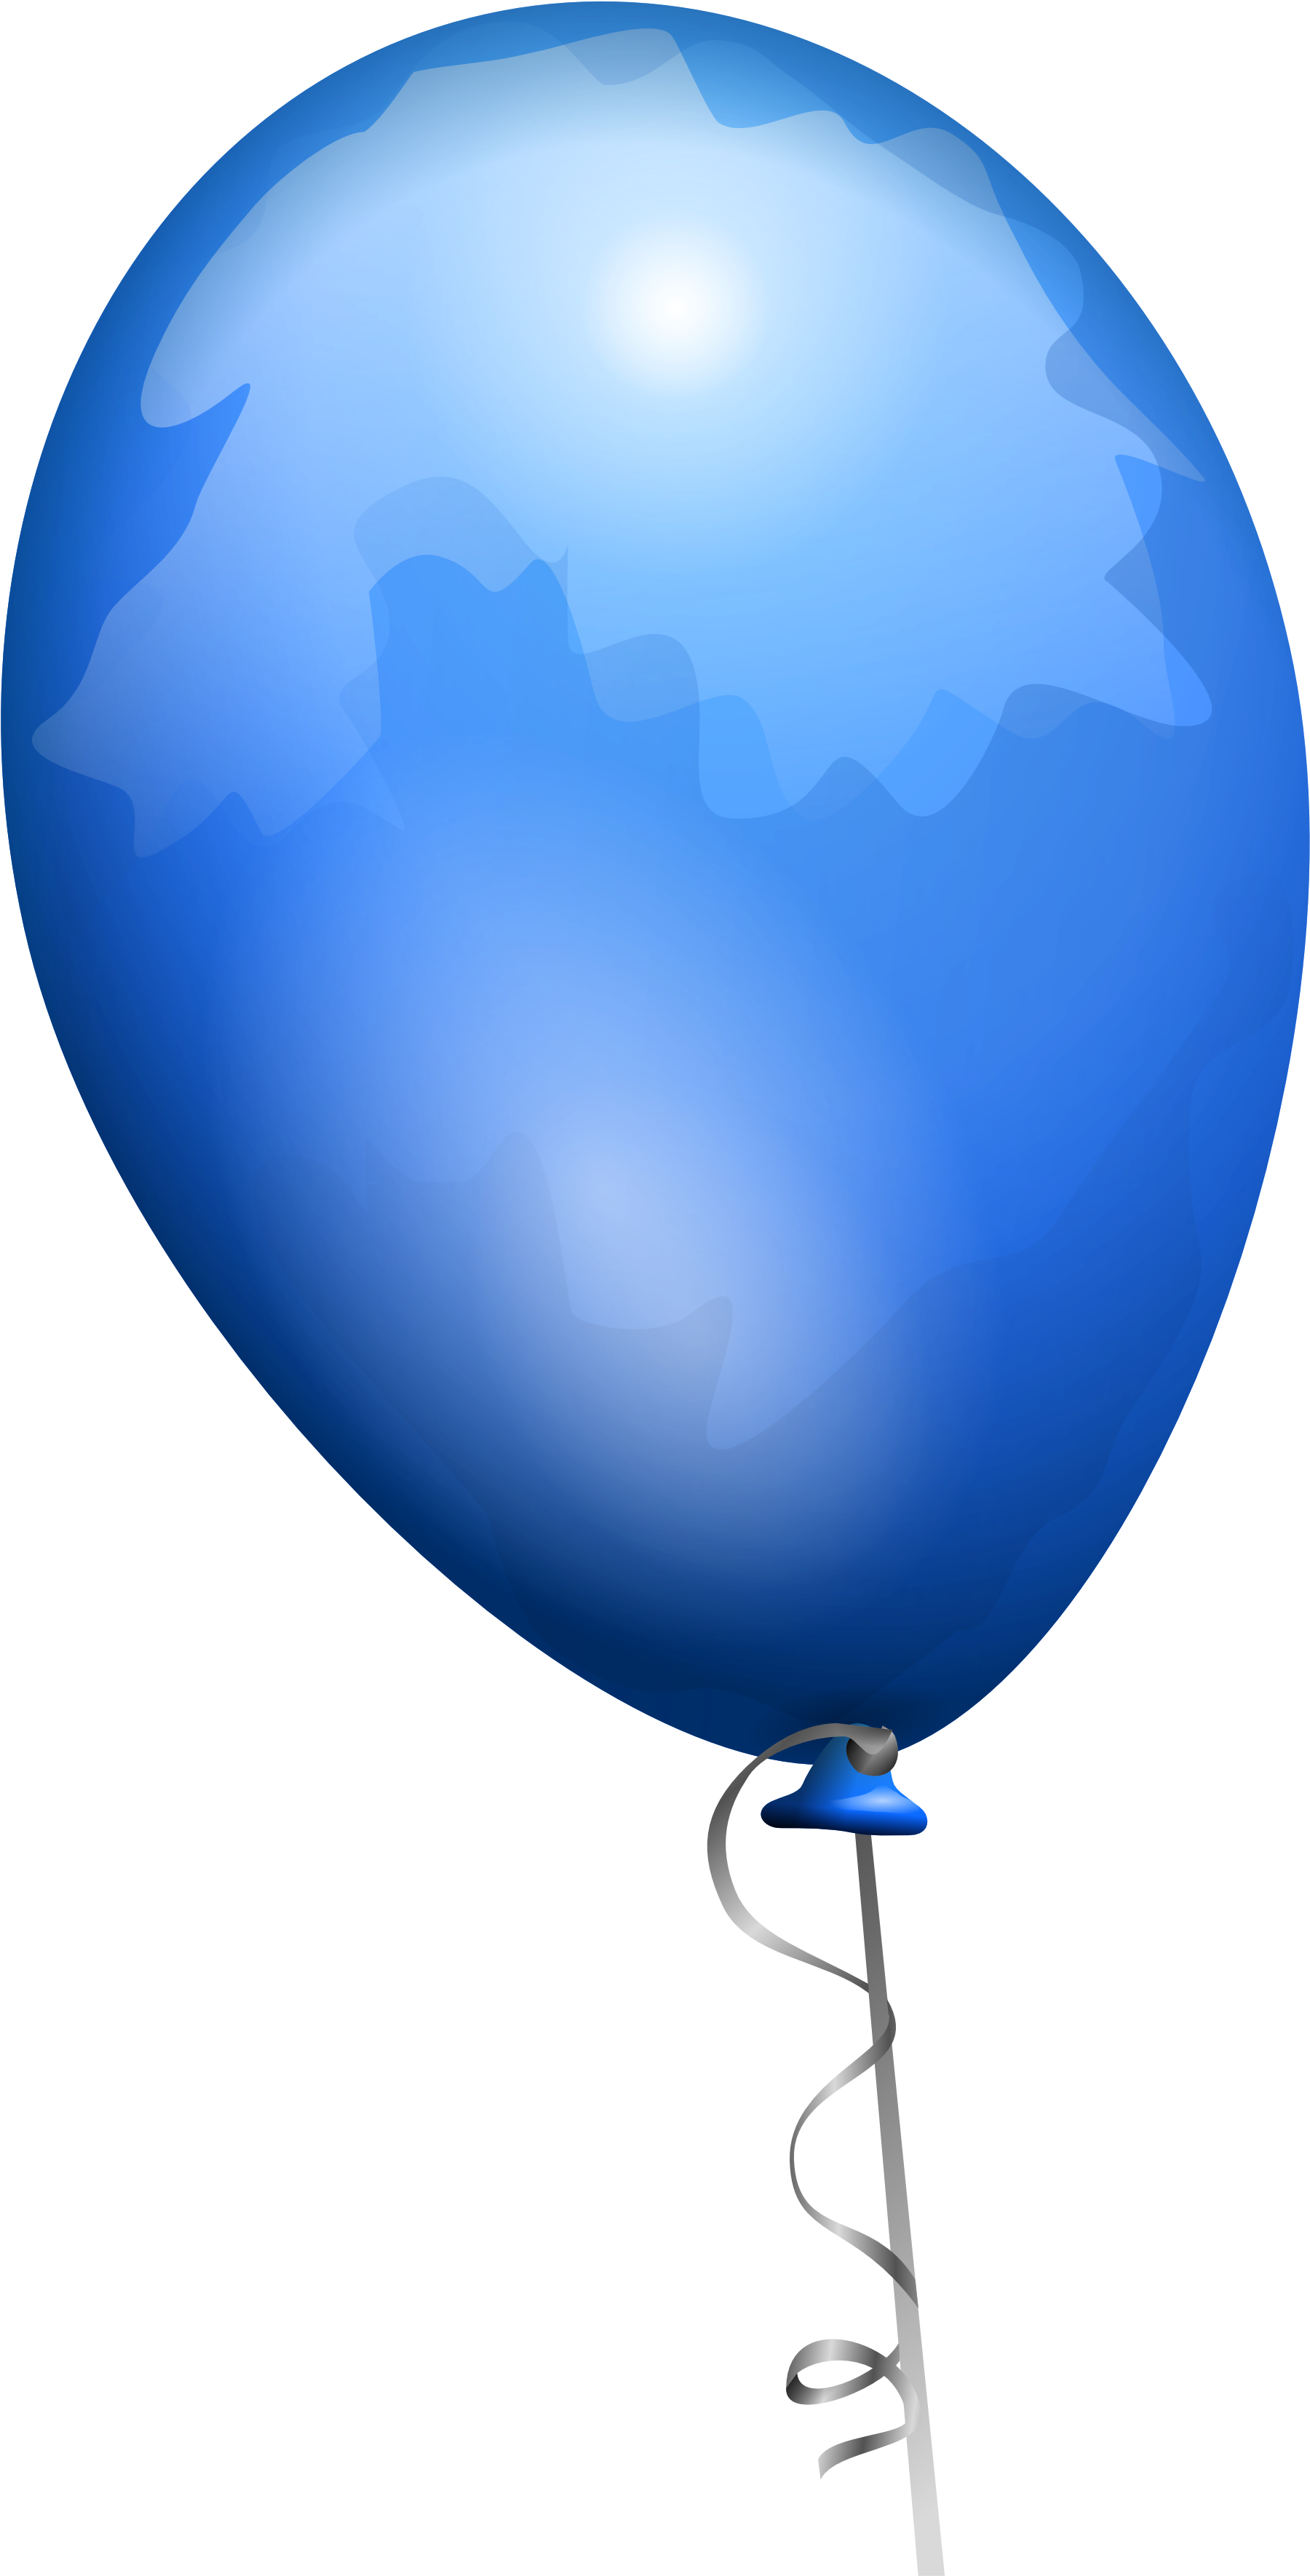 Balloon Png Images, Free Picture Download With Transparency - Protecting Your Online Reputation (1969x3610)